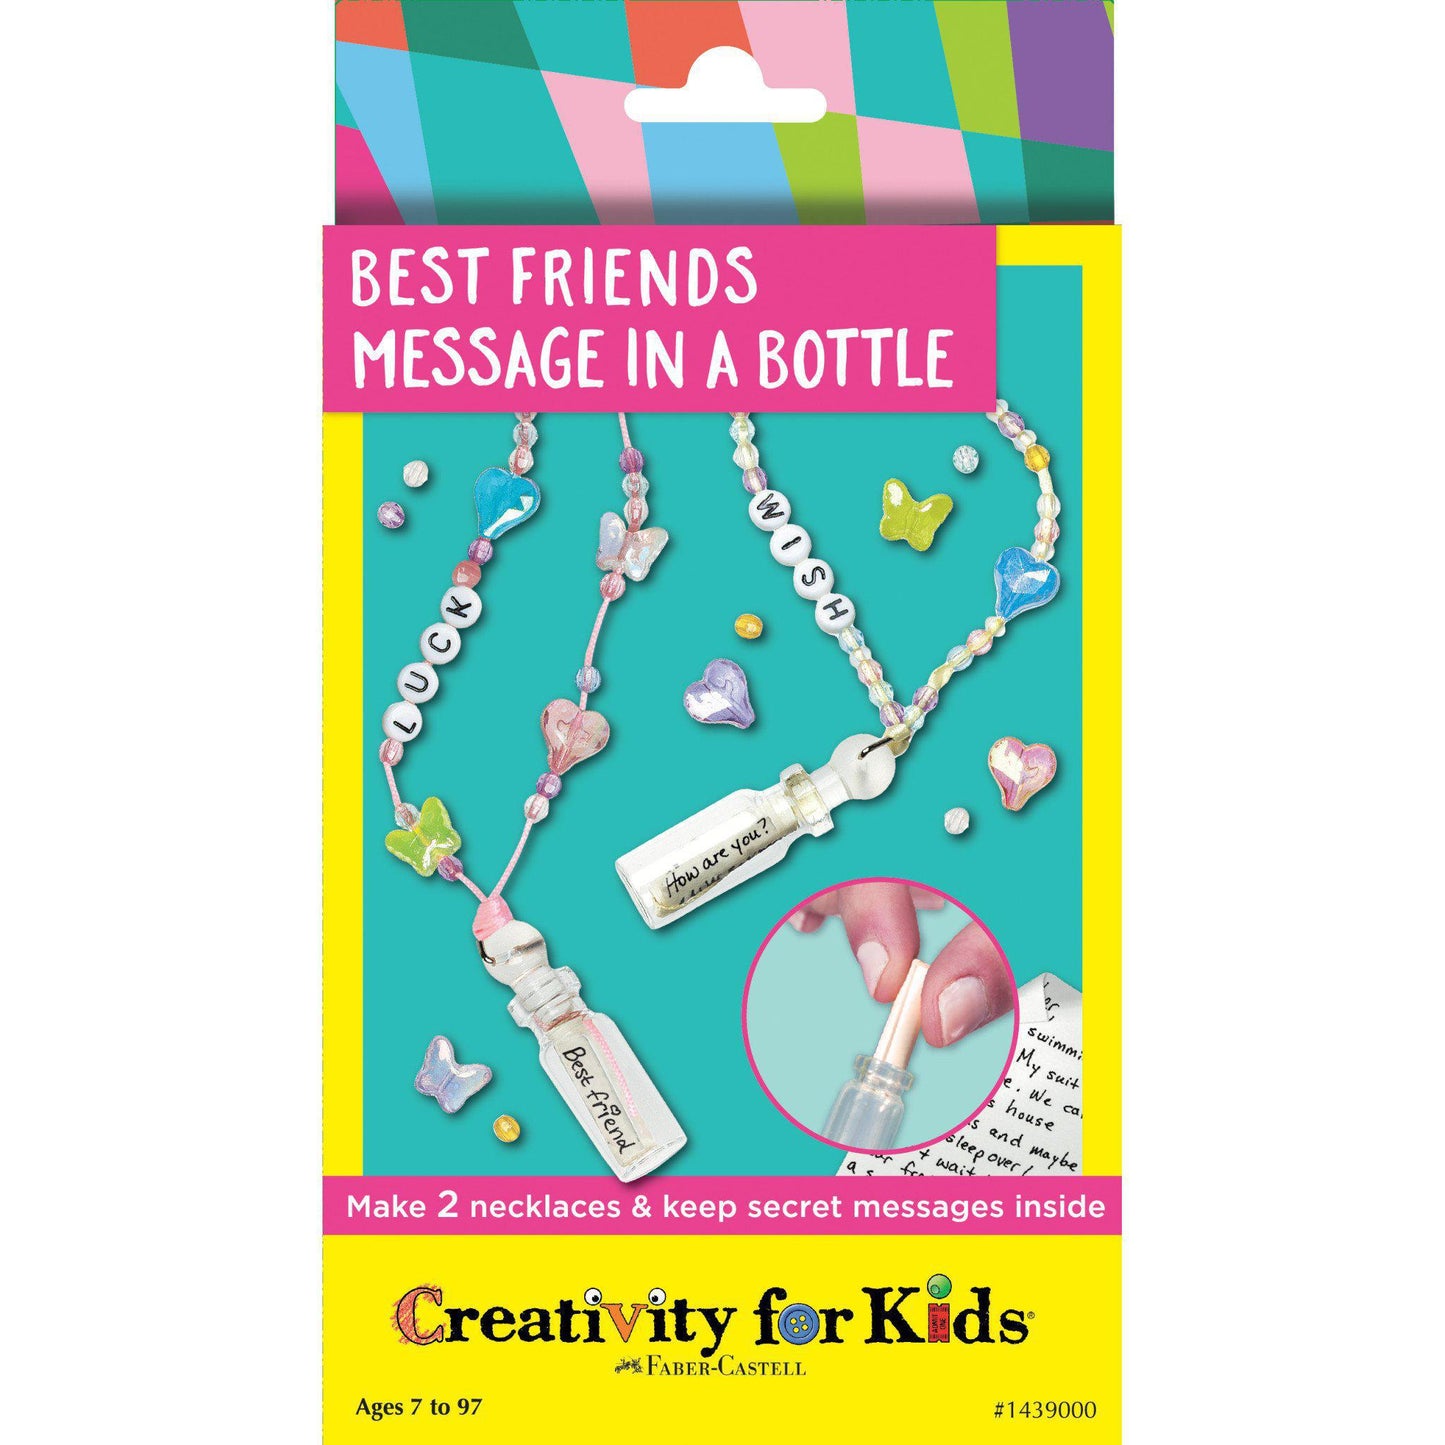 Creativity for Kids Best Friends Message in a Bottle Kit - Write secret messages and put them in the mini glass bottles